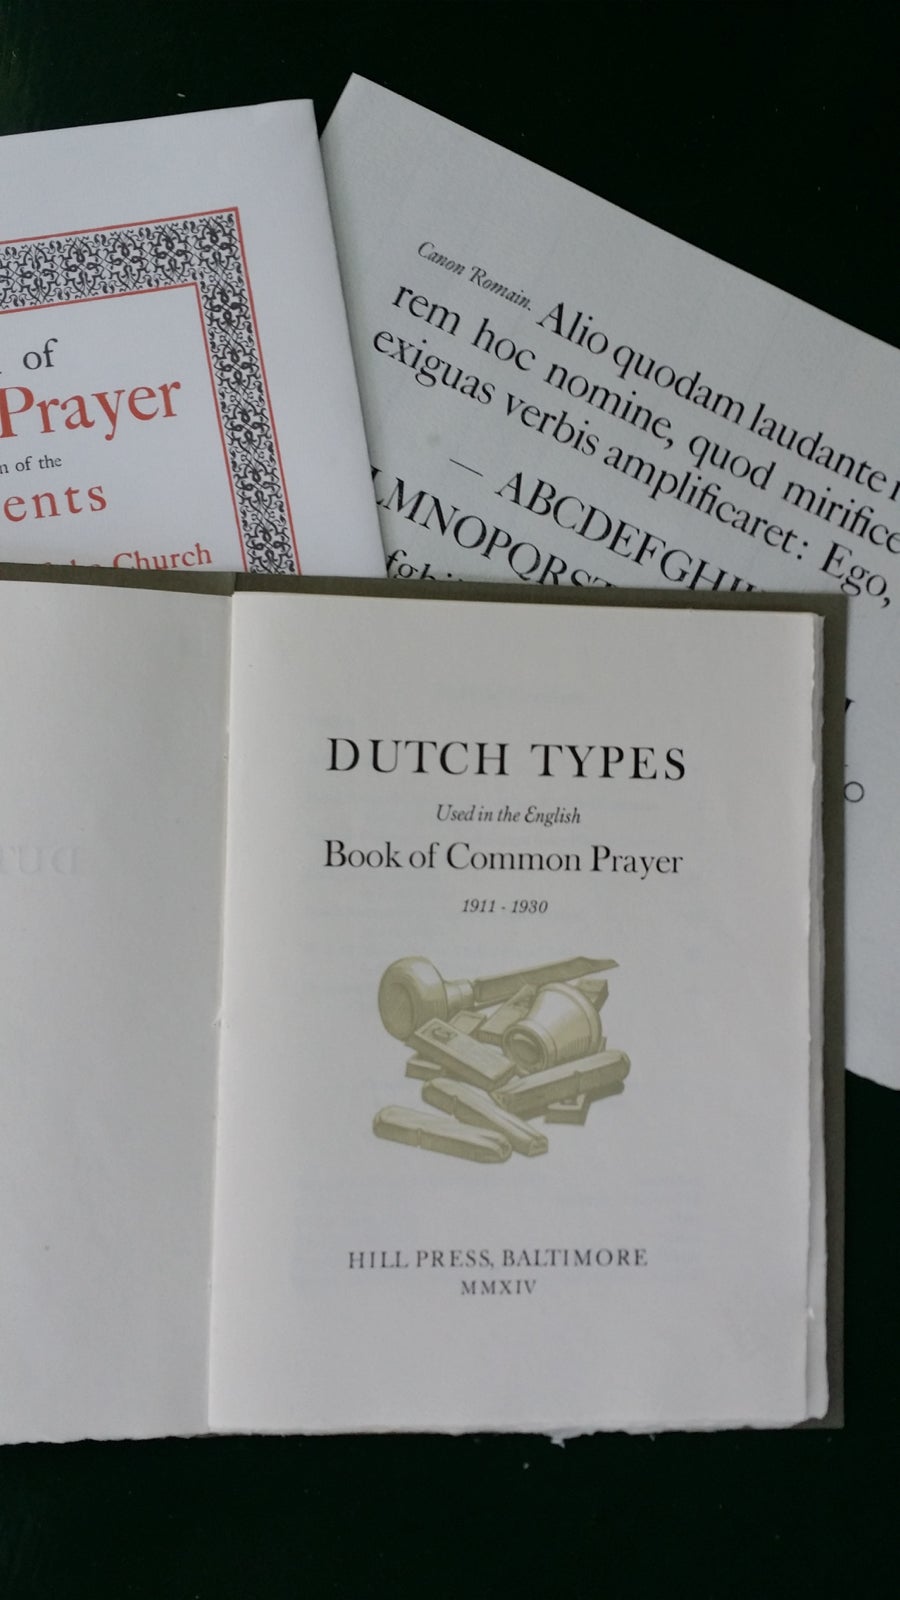 Dutch Types Used in the English Book of Common Prayer 1911-1930.